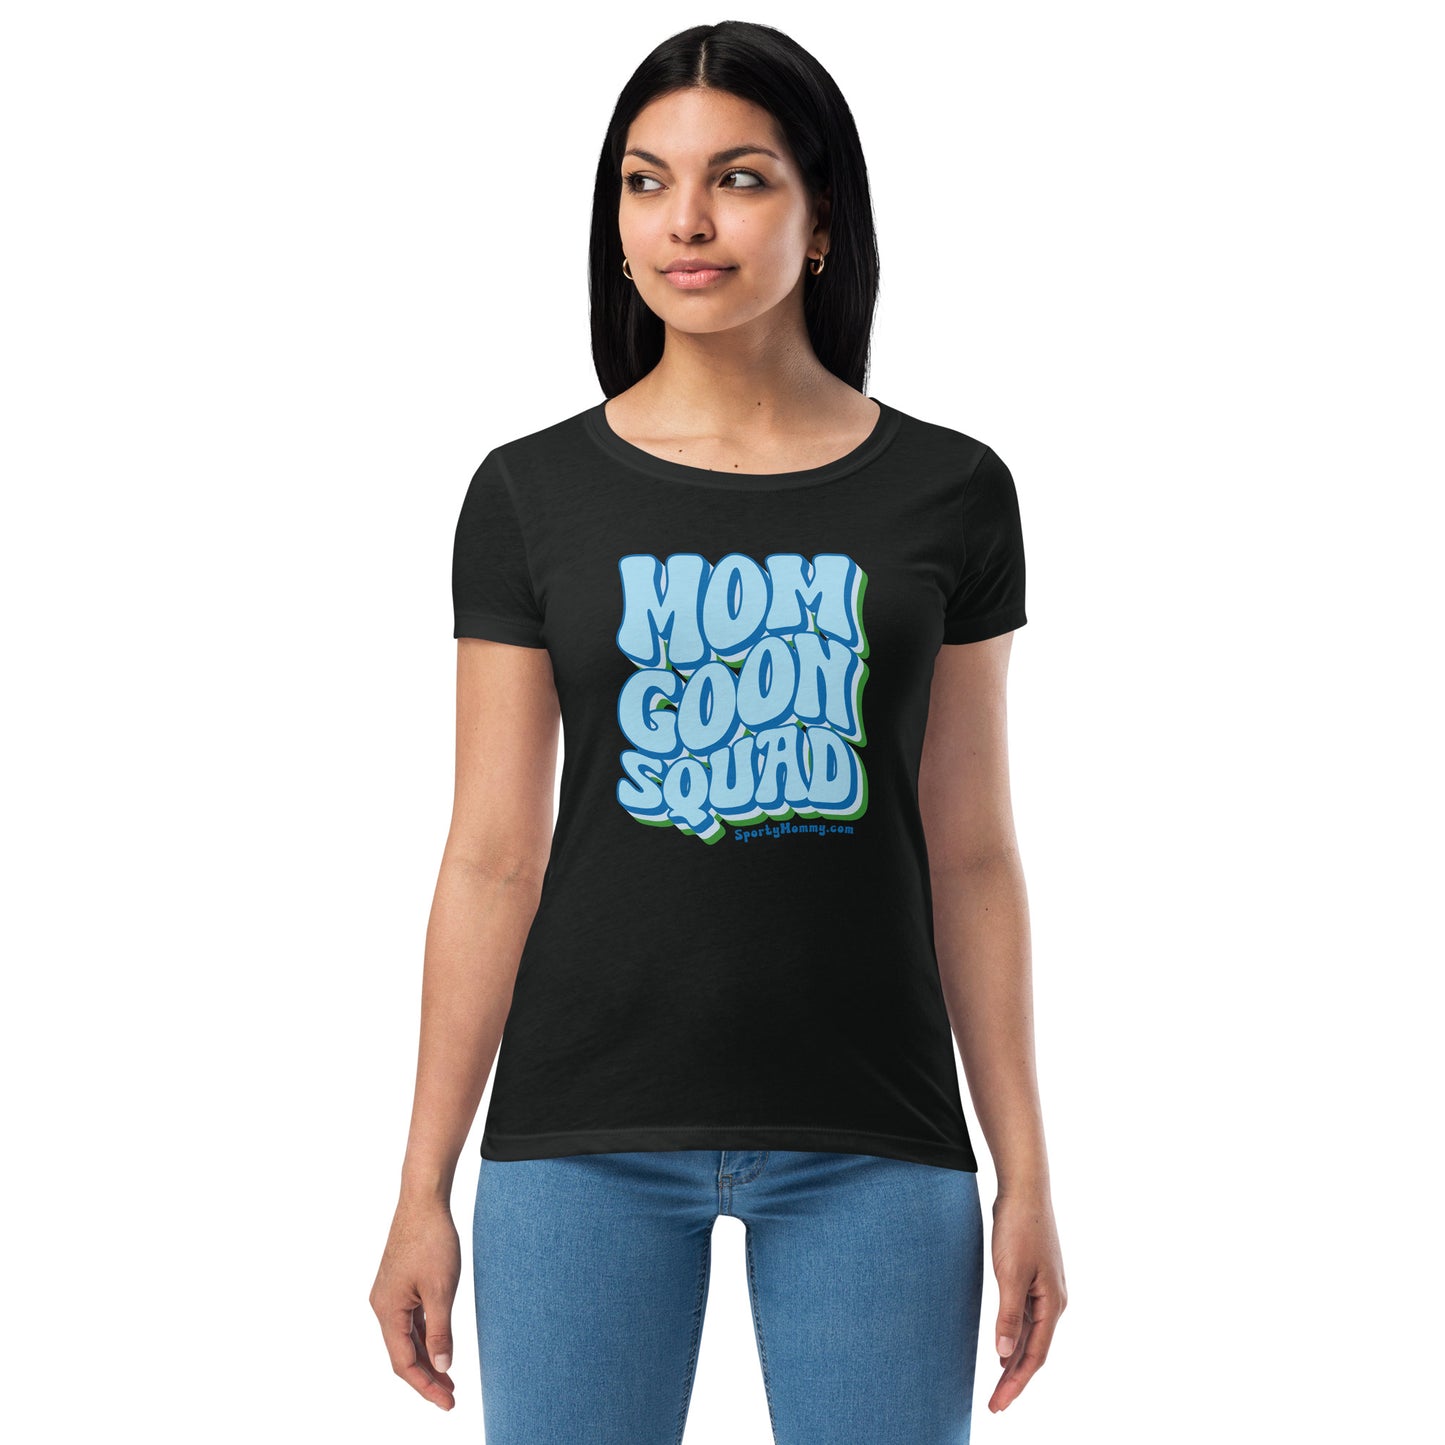 Mom Goon Squad Fitted T-Shirt